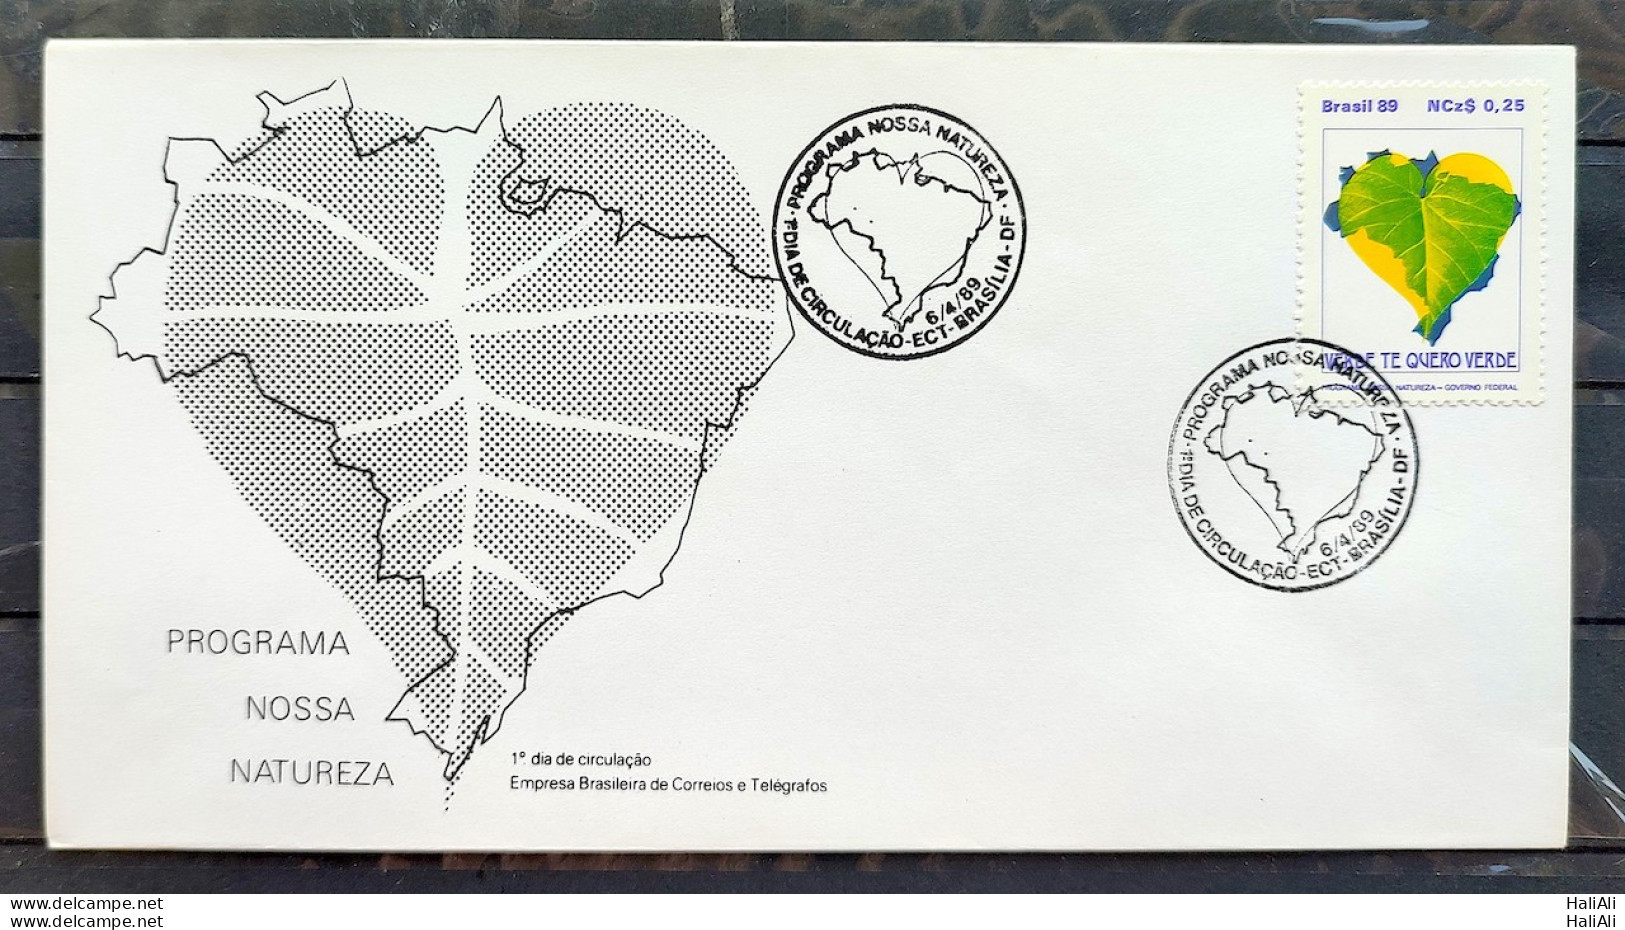 Brazil Envelope FDC 466 1989 Our Nature Map Program Environment CBC BSB 04 - Usati